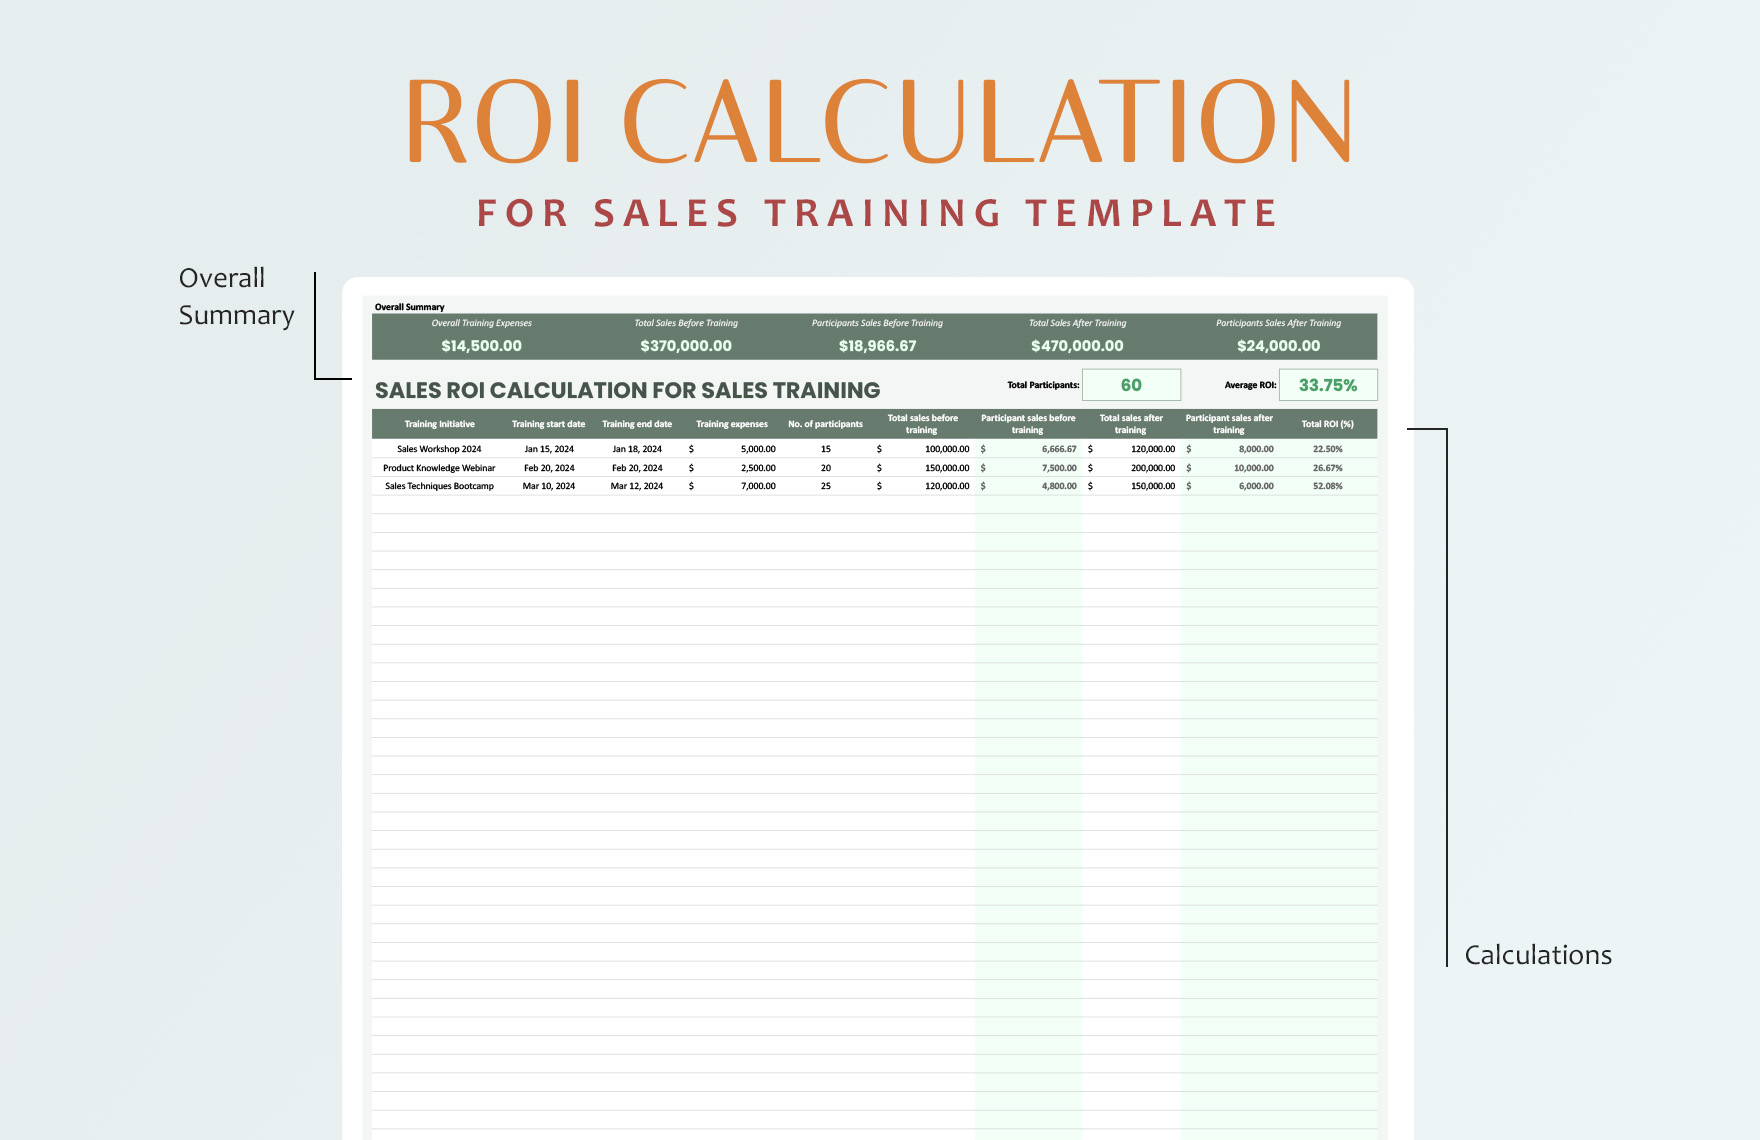 Sales ROI Calculation for Sales Training Template